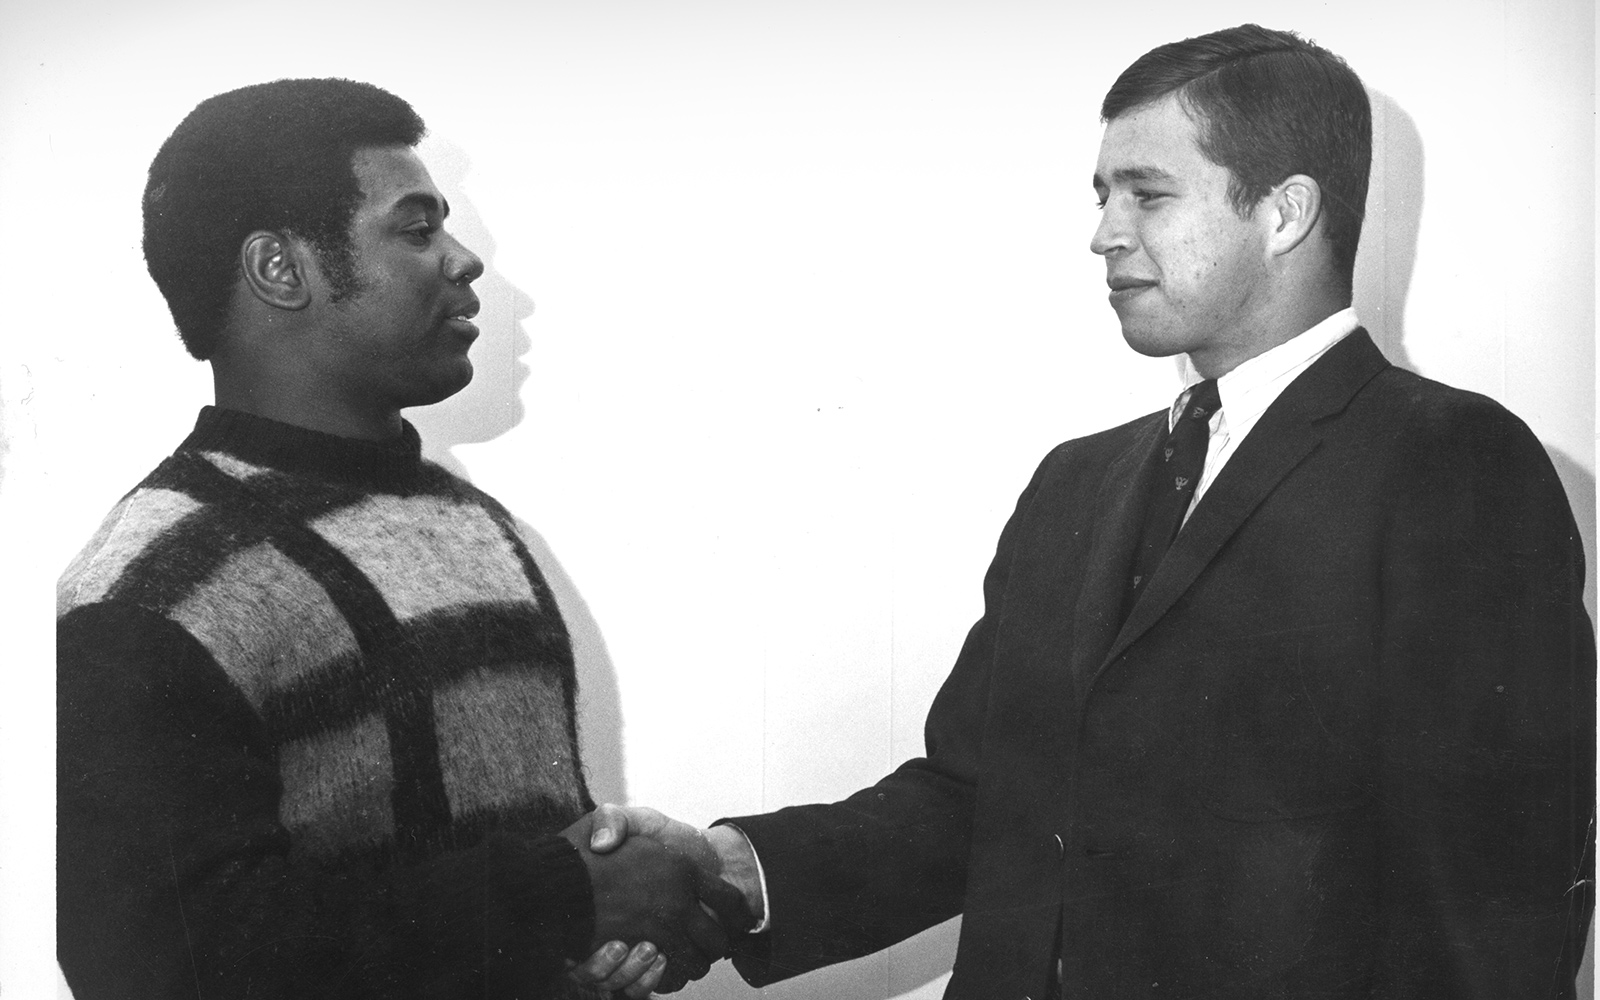 Henry Durand ’70, who died in 2018, and Scott Trumbull ’70 were teammates on Denison’s football team. They would go on to work together for the betterment of the college after graduation. Durand became the president of the Black Alumni Asso…